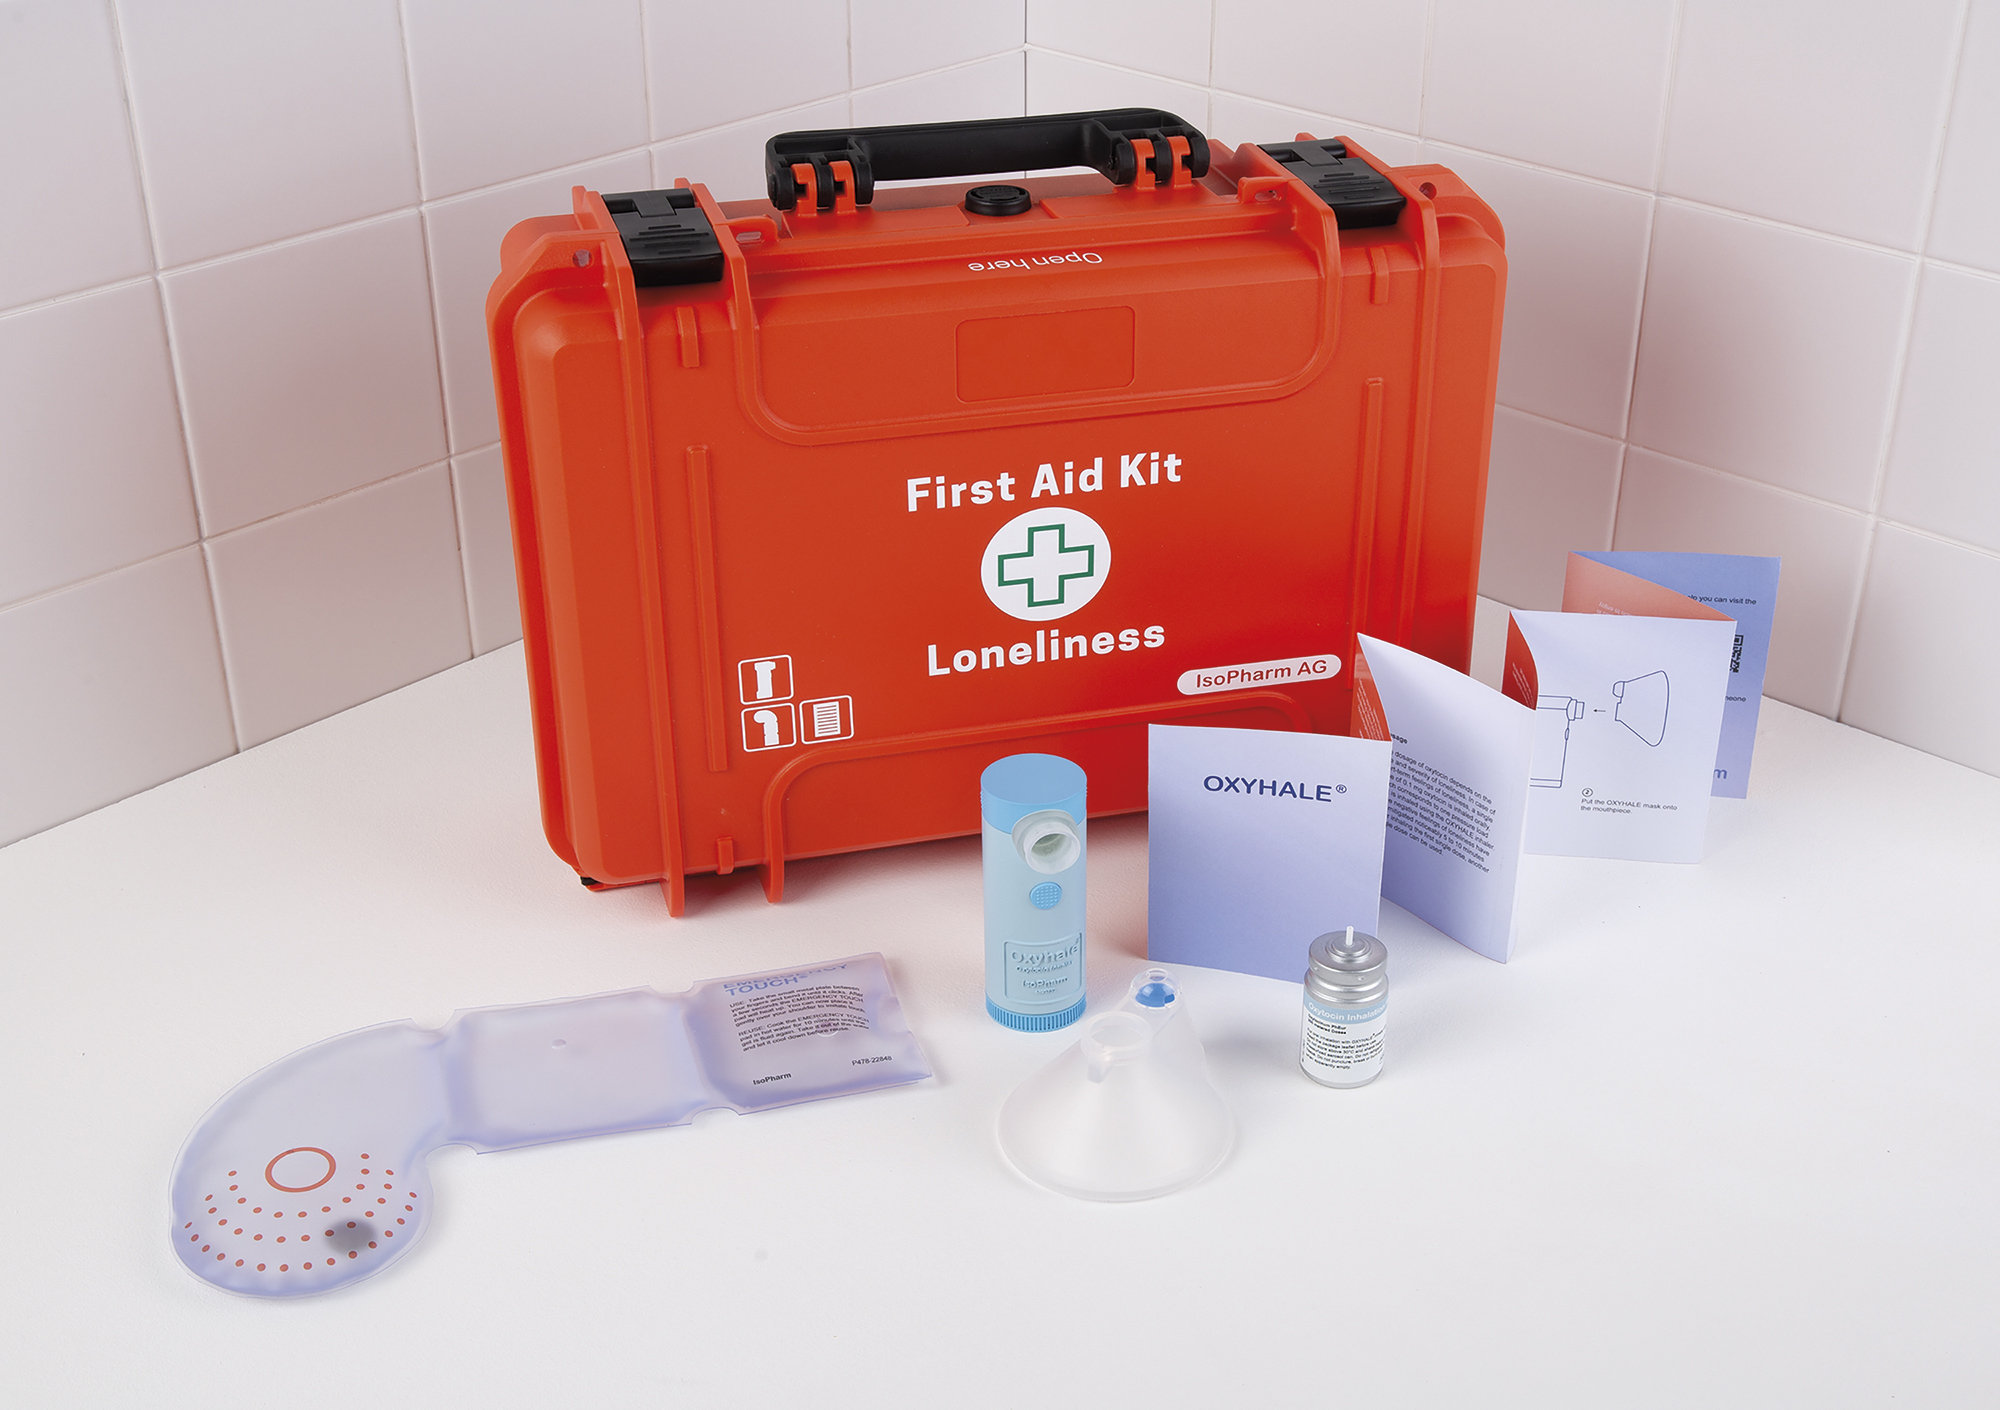 A First Aid Kit Against Loneliness